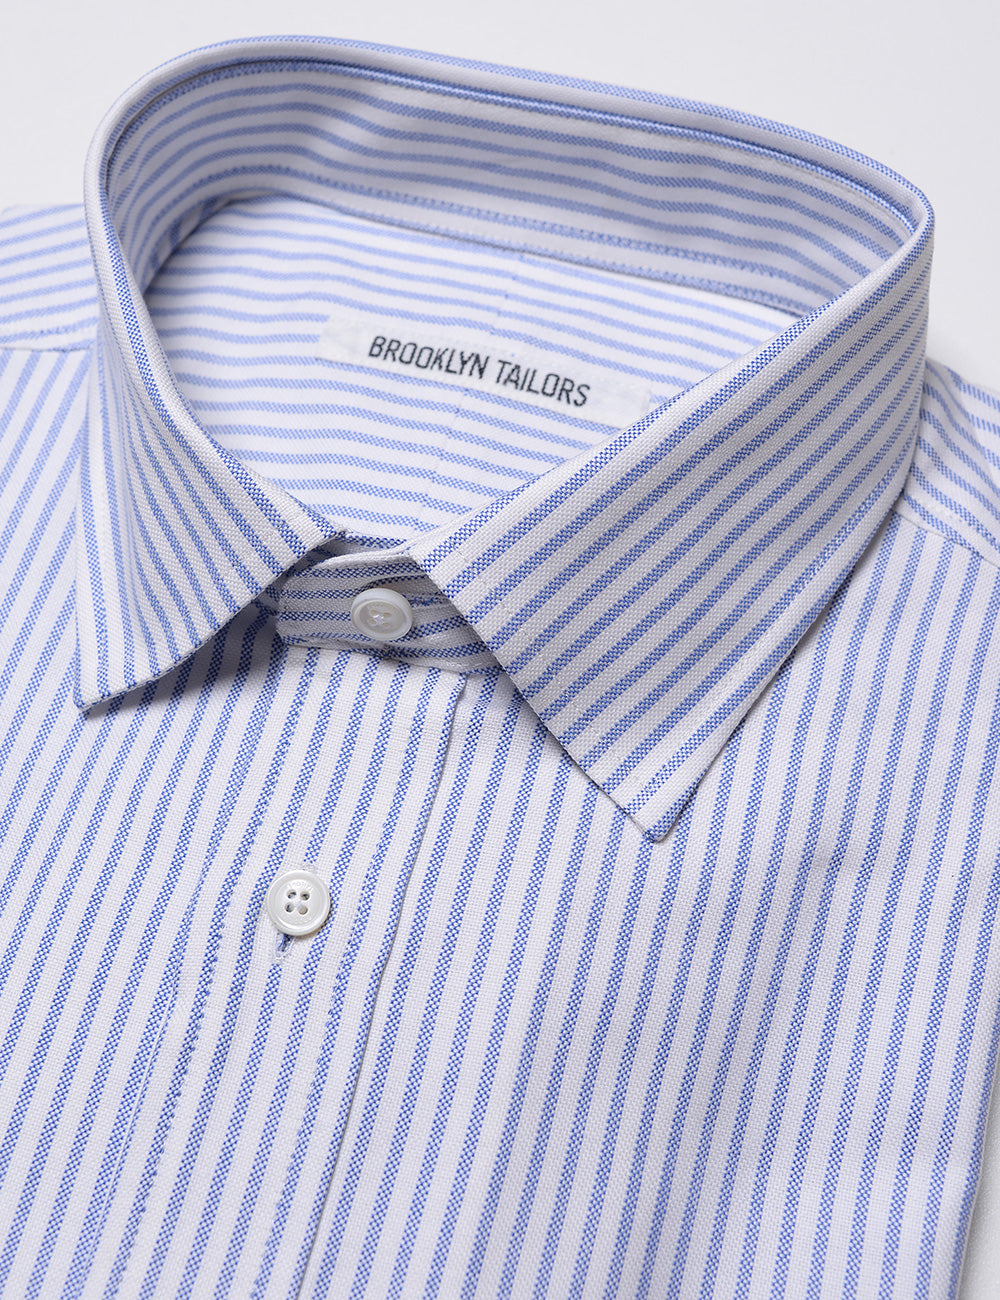 Detail of collar, labeling, buttons, and fabric pattern and texture on Brooklyn Tailors BKT20 Slim Dress Shirt in Striped Oxford - White / Sky Blue